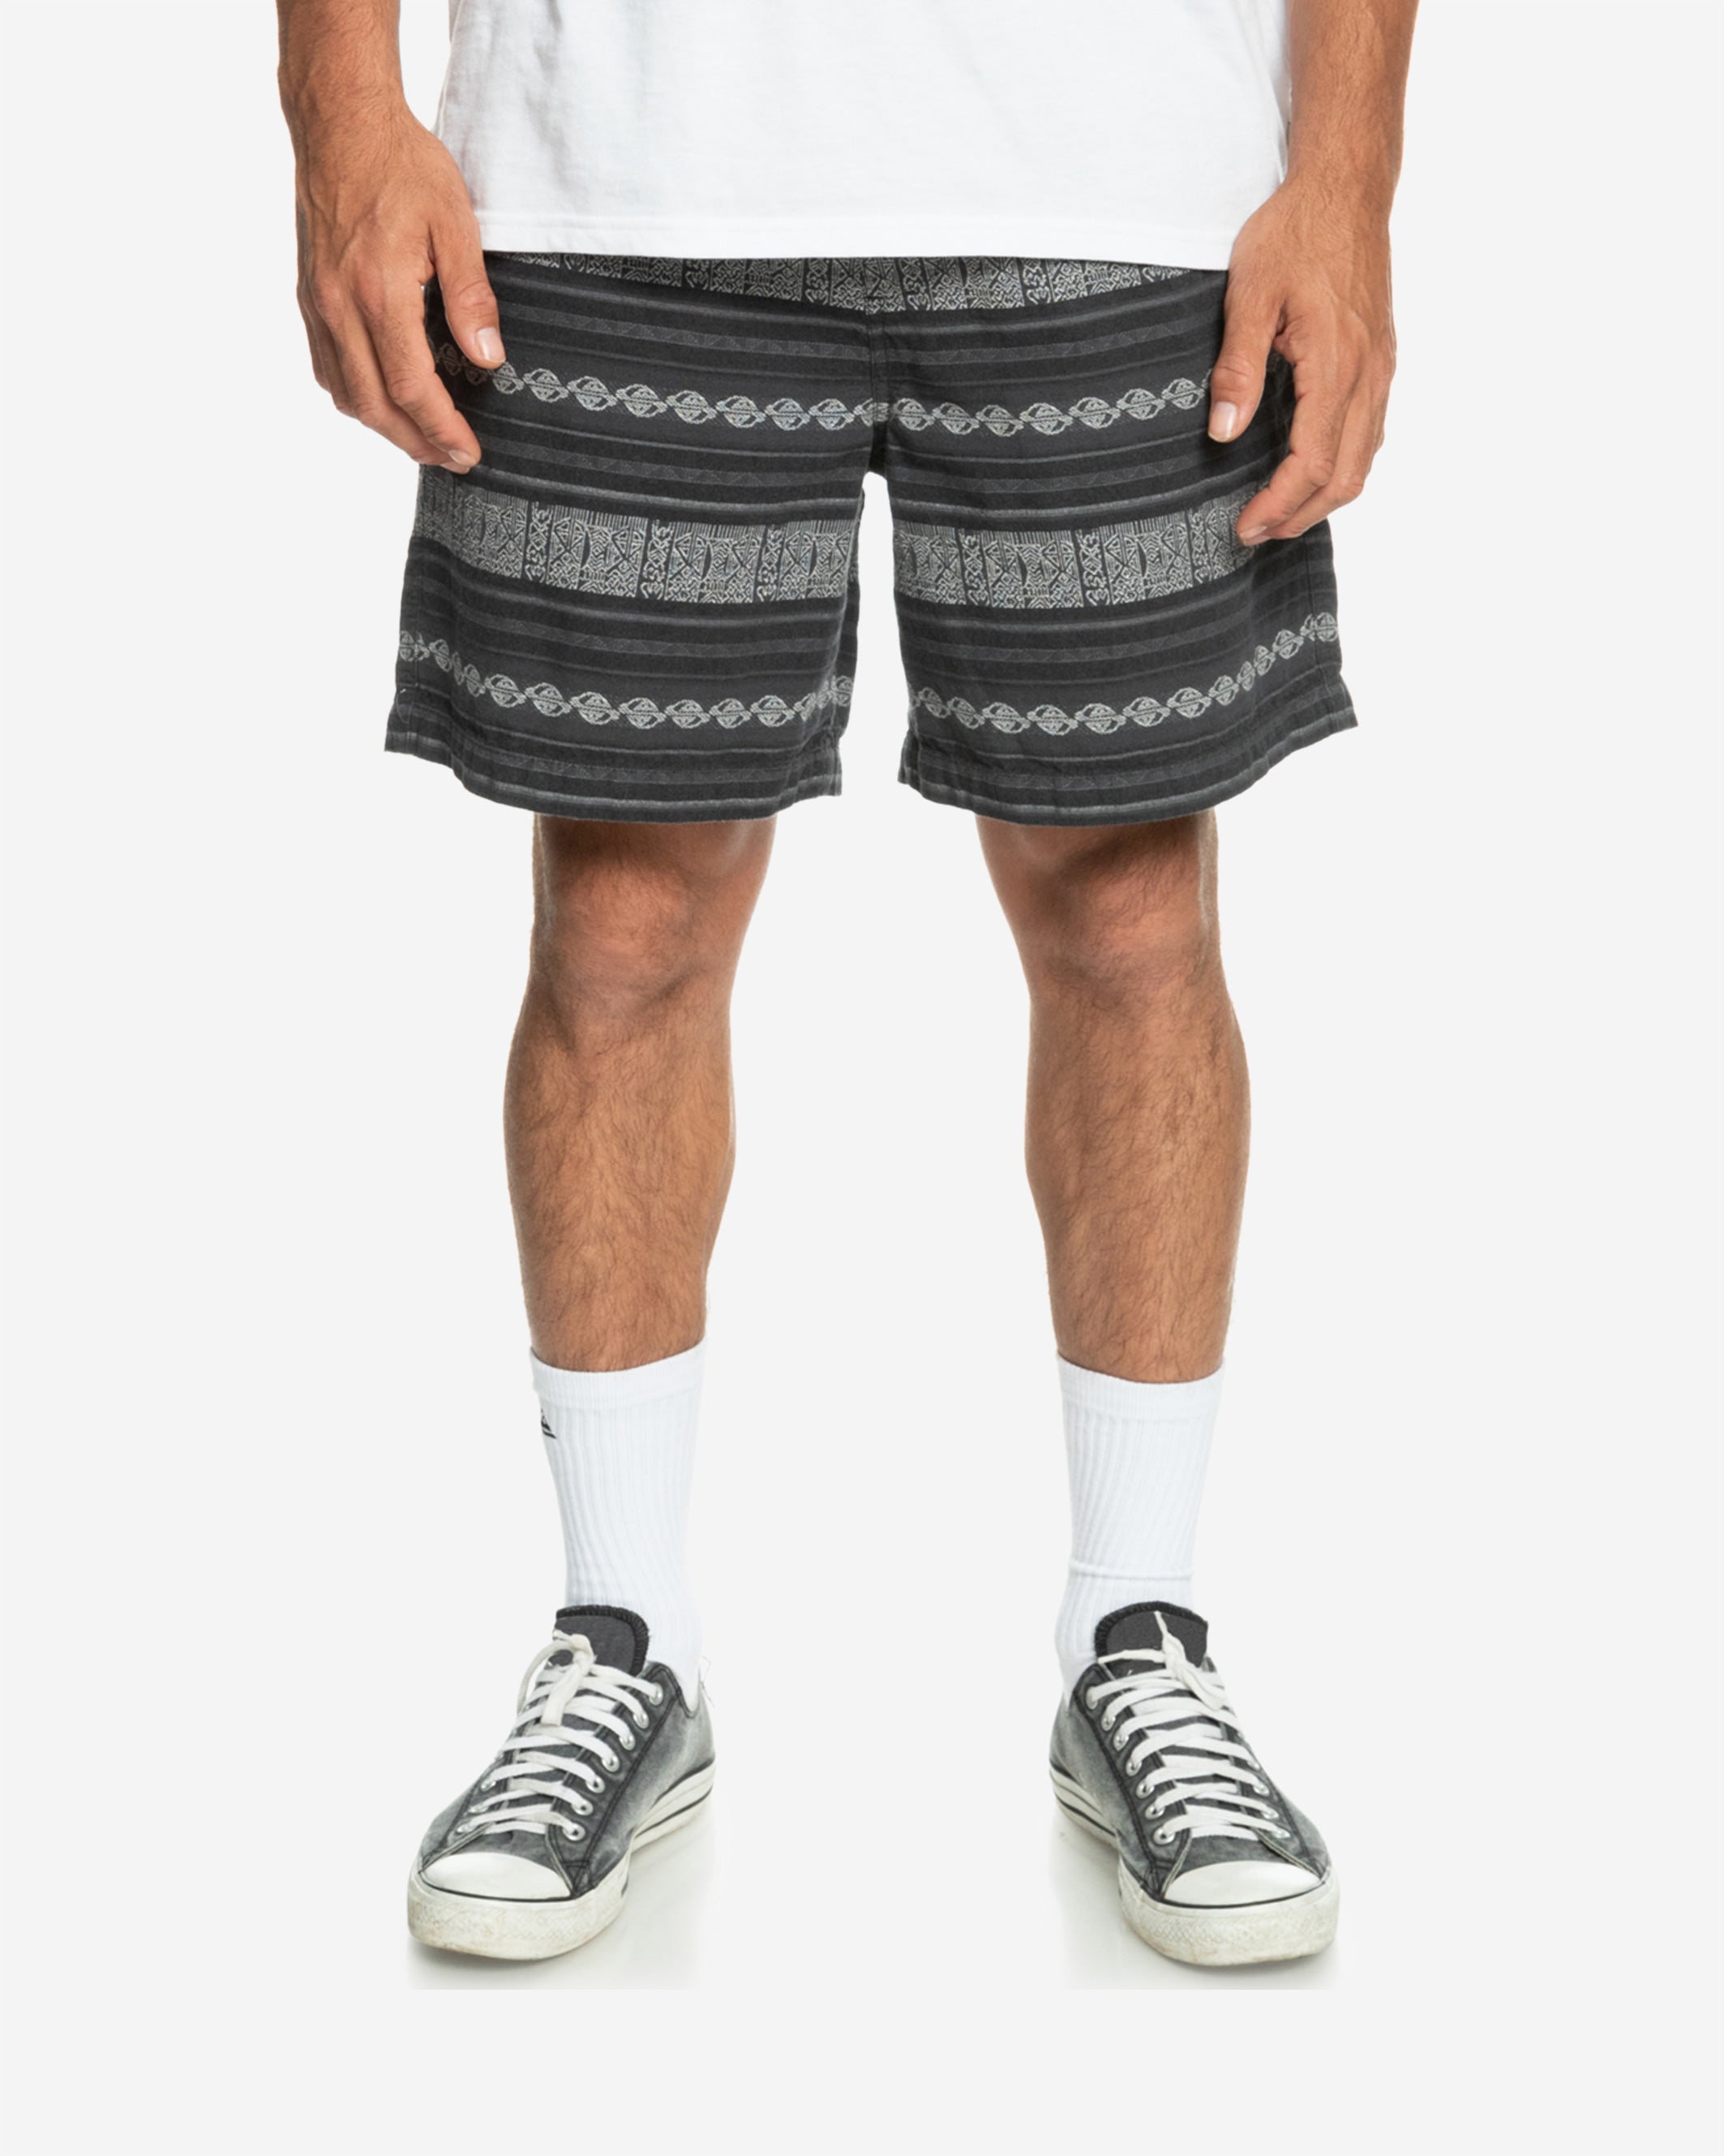 Jacquard brings a fresh point of view to our famous Taxer shorts. Still chill, but now slightly elevated for those times when you want to make a better impression. A relaxed fit and a drawcord closure tie the modern surf vibe altogether.